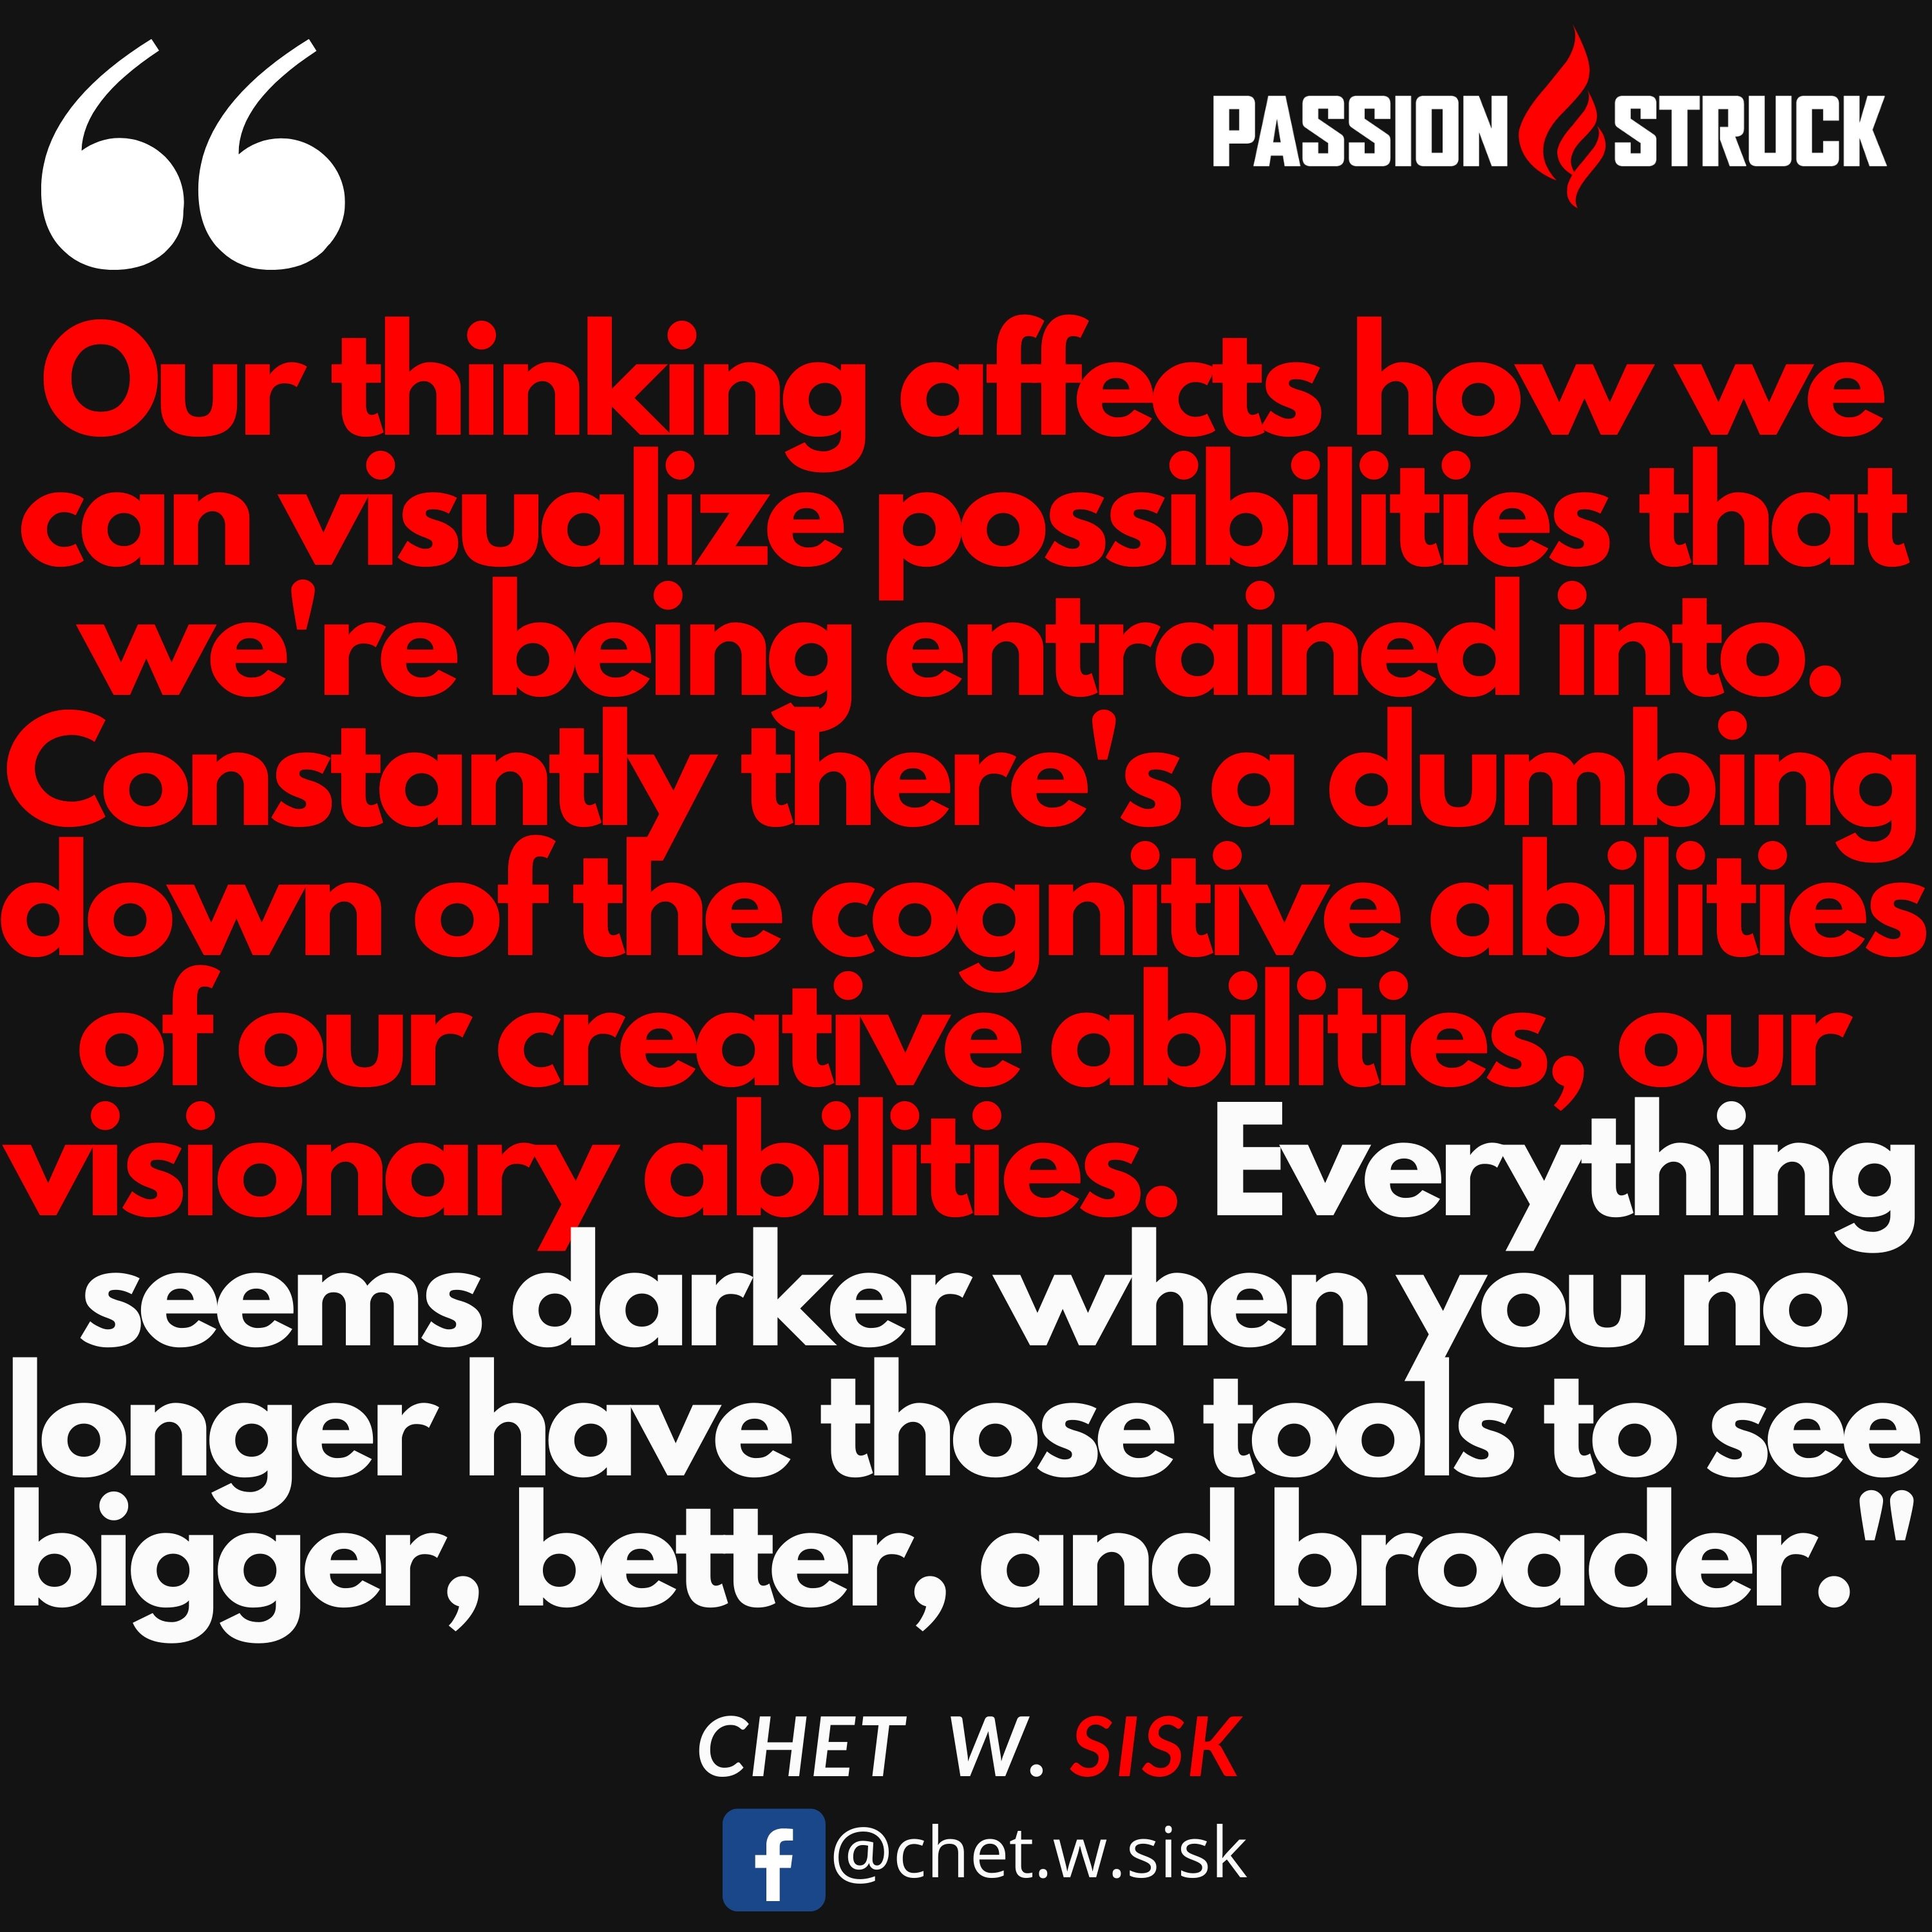 Futurist Chet W. Sisk quote on the future of society